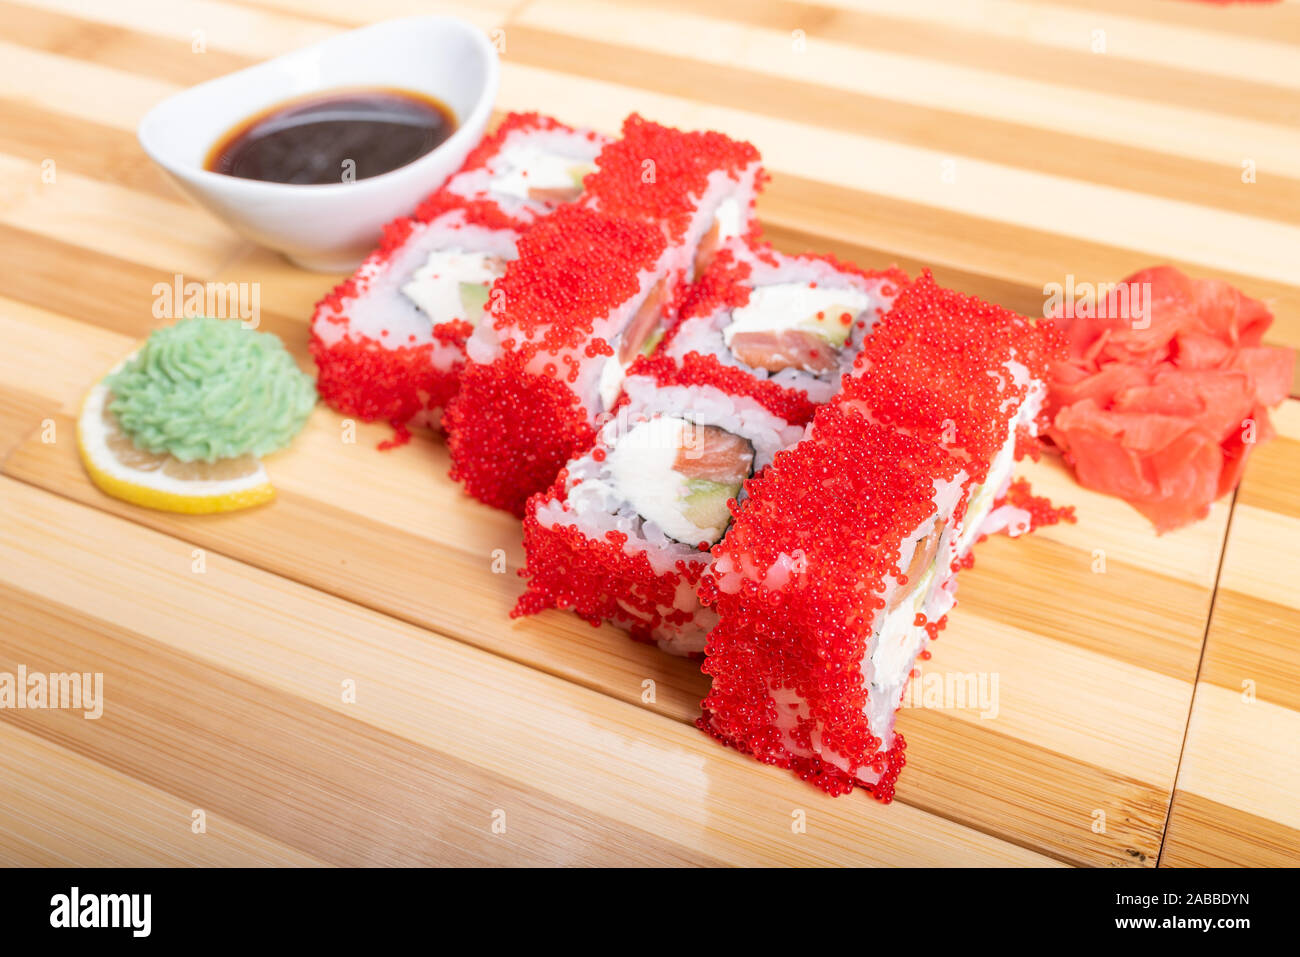 California roll with red flying fish caviar, with wassabi and ginger. Stock Photo